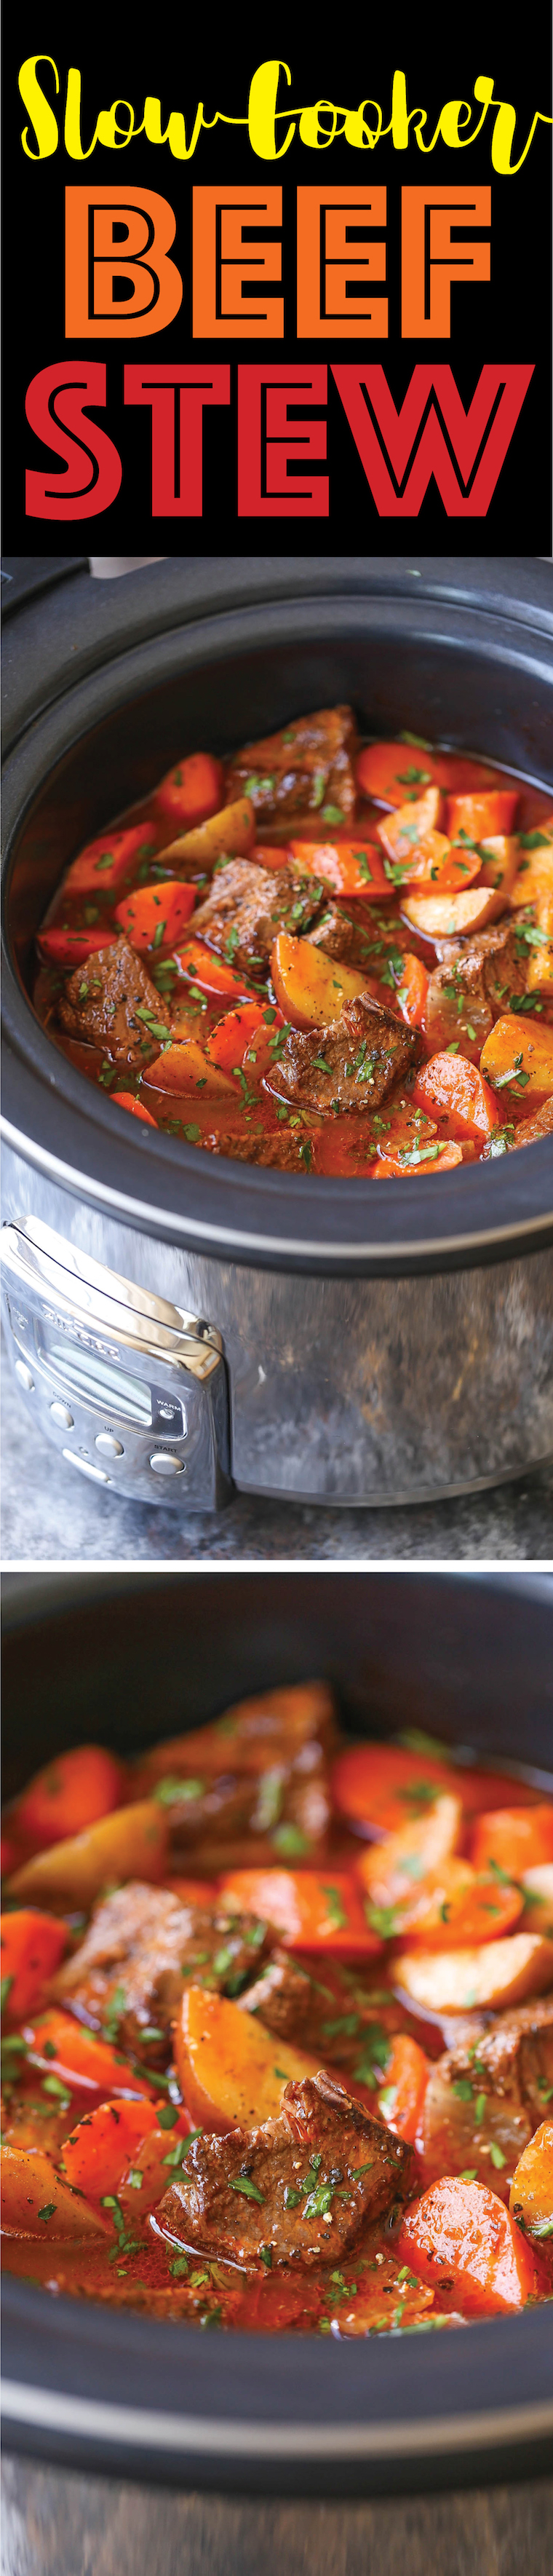 Slow Cooker Beef Stew - Everyone’s favorite comforting beef stew made easily in the crockpot! The meat is SO TENDER and the stew is rich, chunky and hearty!